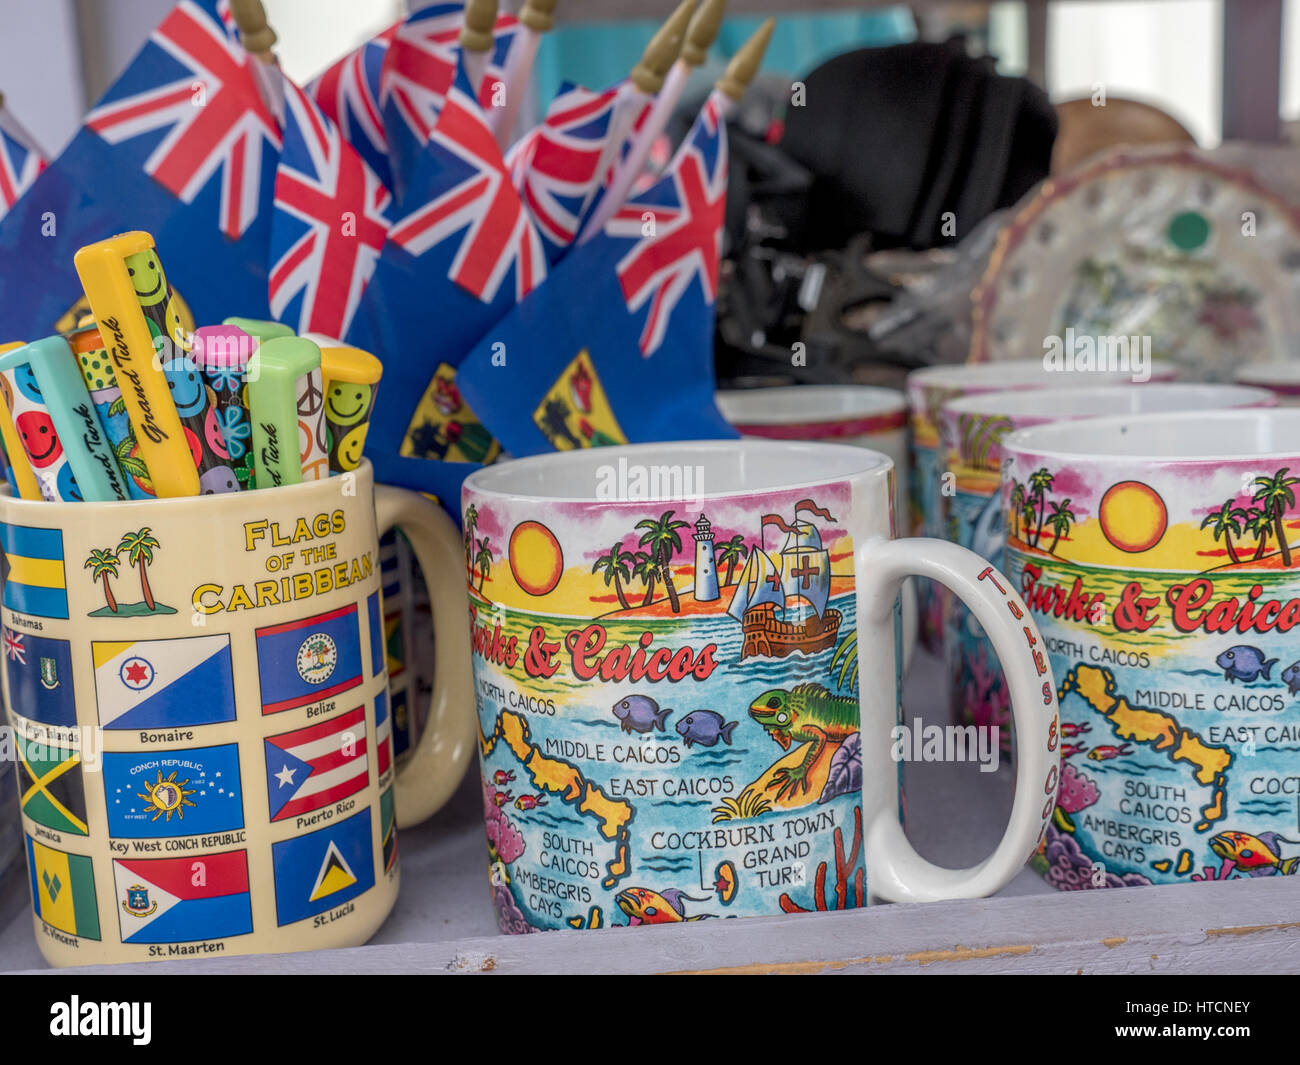 Turks And Caicos Tourist Souvenir Coffee Mugs, Pens And Flags For Sale At A Store On Grand Turk Stock Photo